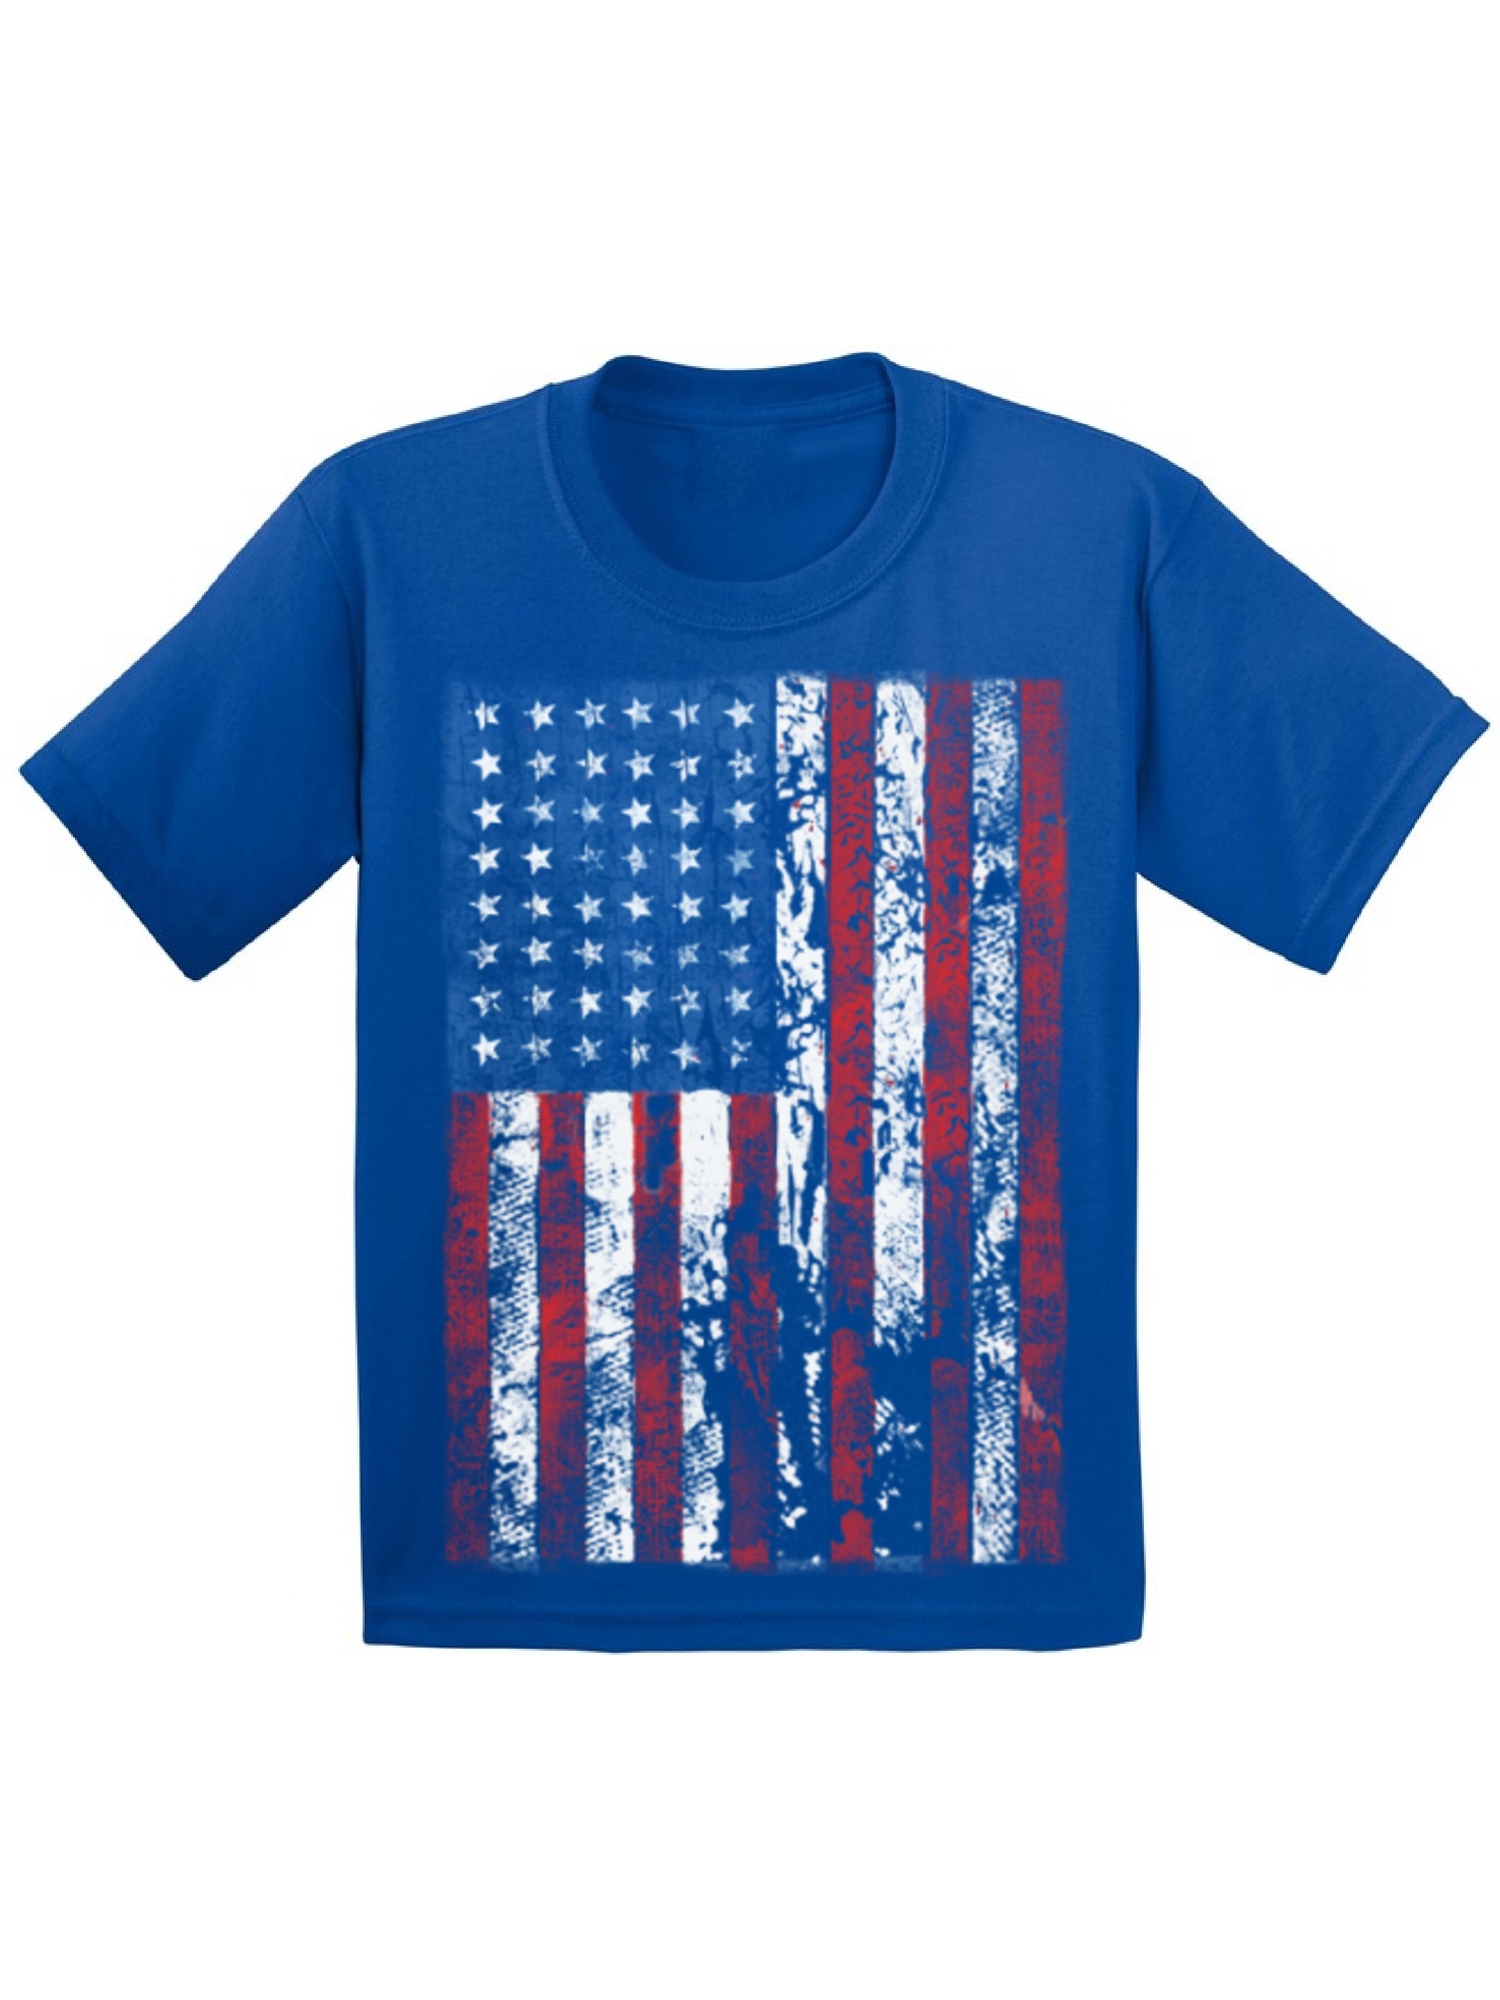 Awkward Styles Youth USA Flag Distressed Graphic Youth Kids T-shirt Tops 4th of July Independence Day - image 1 of 4